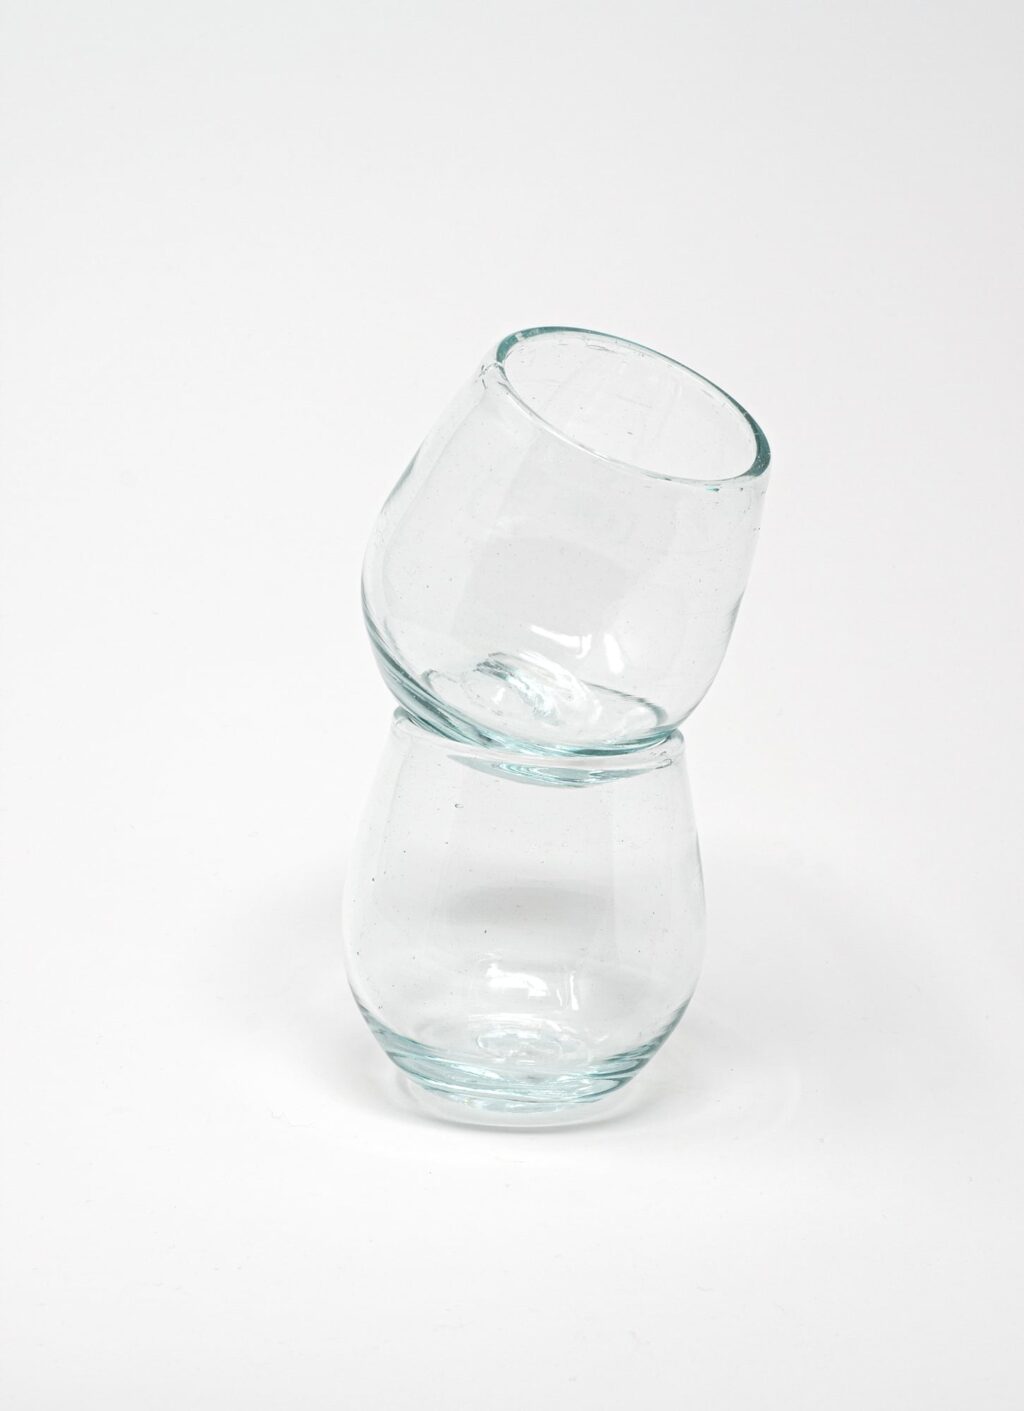 La Soufflerie - Hand-blown recycled glass - Goblet Rond - Transparent